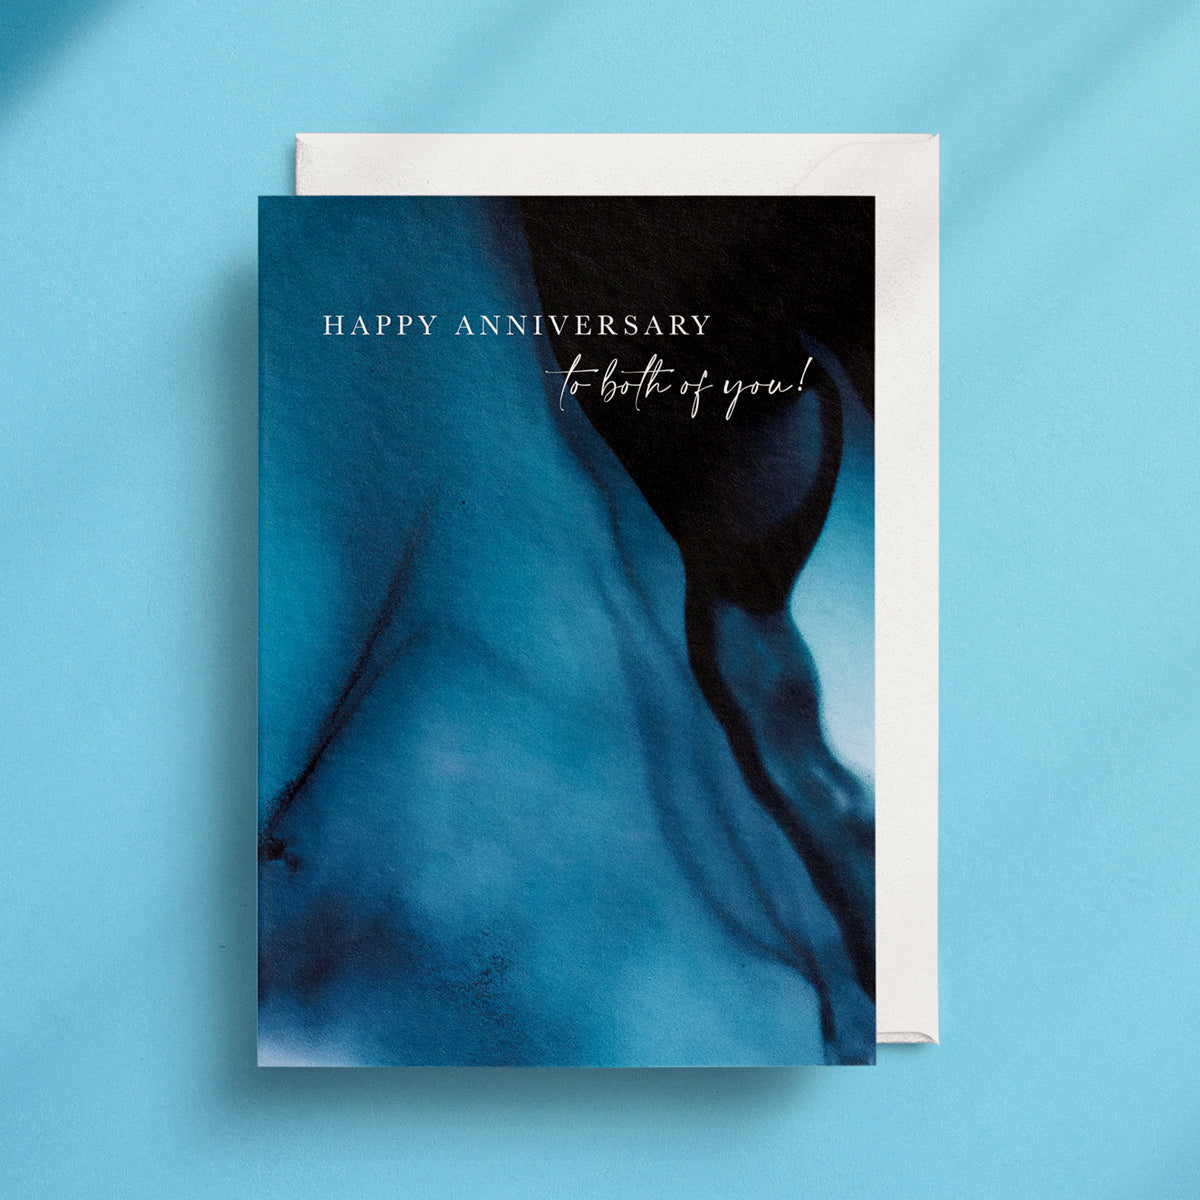 Happy Anniversary To Both Of You! - Greeting Card